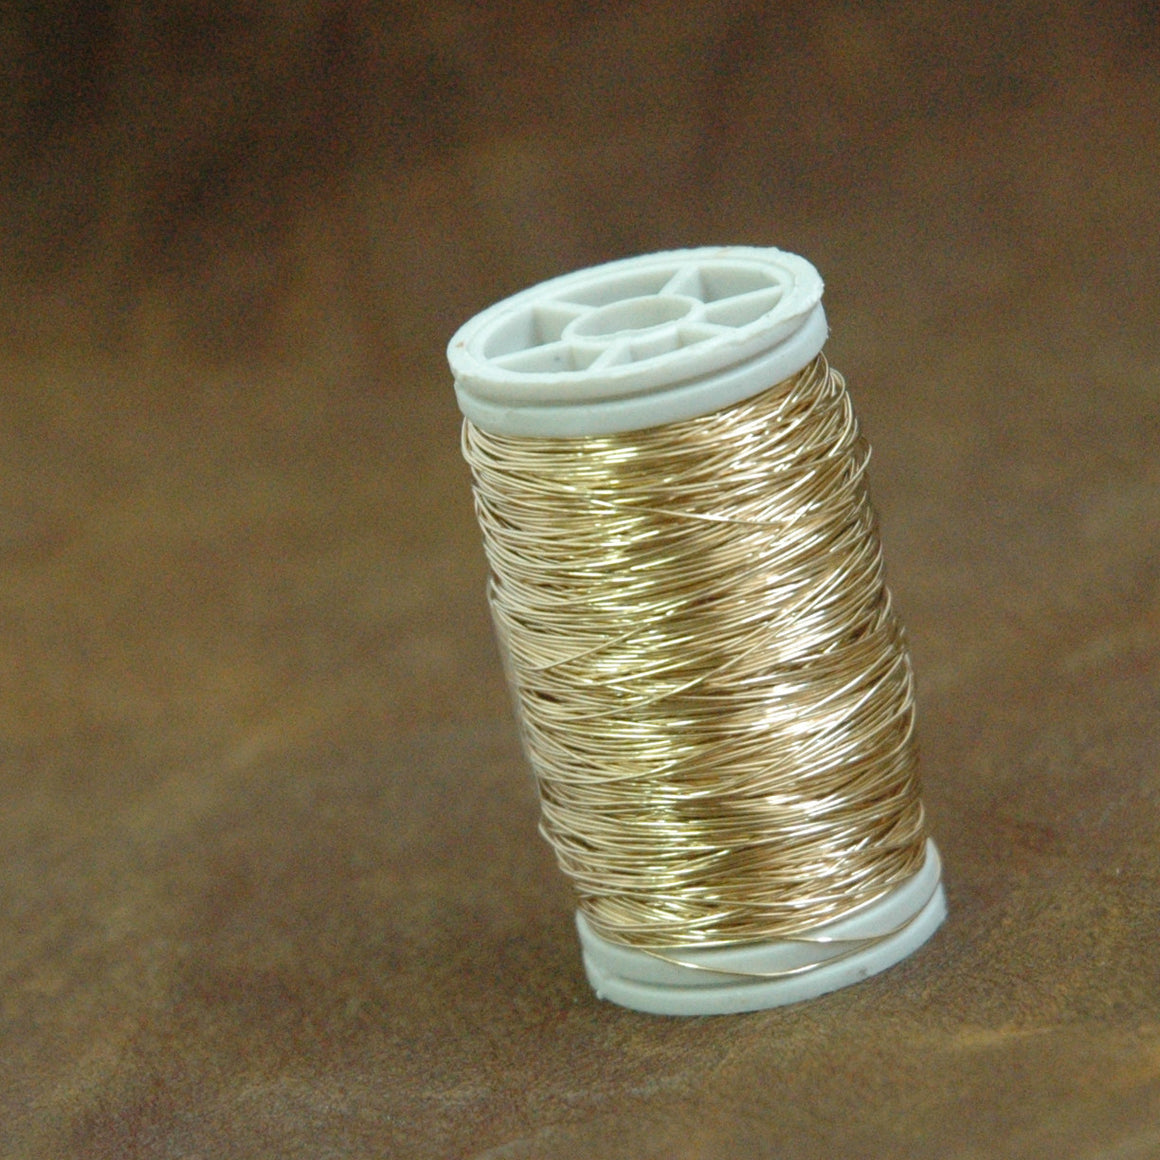 Gold filled wire , dead soft gold filled , 28gauge , wire crochet supplies, gold wire, 80ft 26 yard - Yooladesign